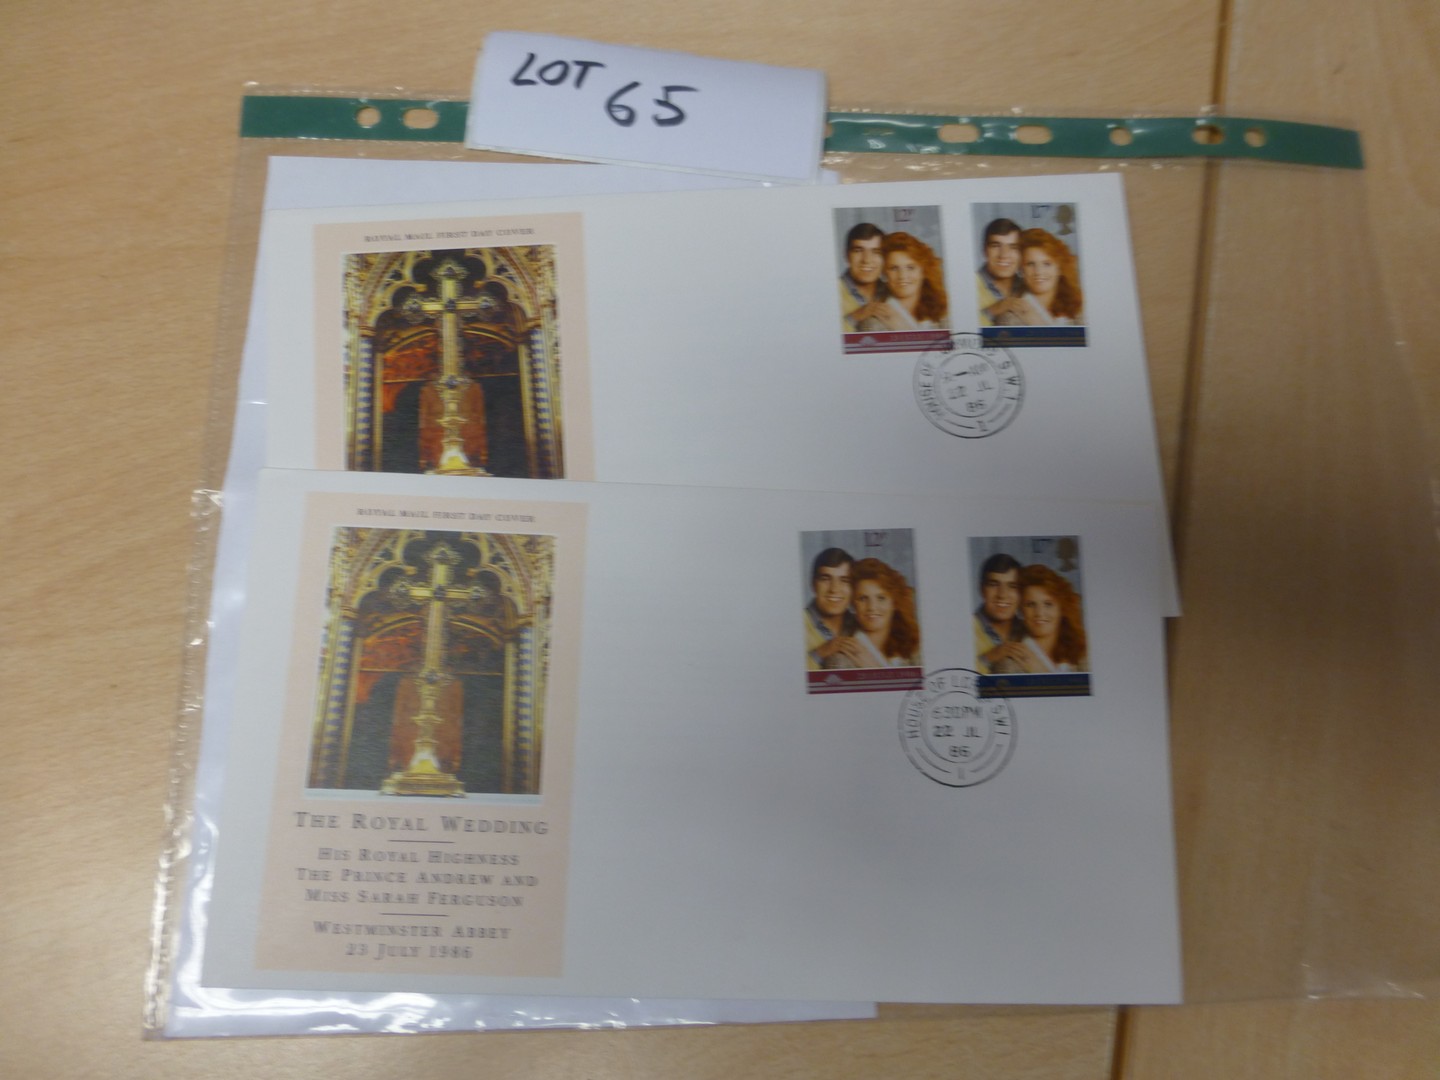 GB Royal Wedding & Prince Andrew/Sarah Ferguson 1986 – 2 covers with special postmarks 1: House of